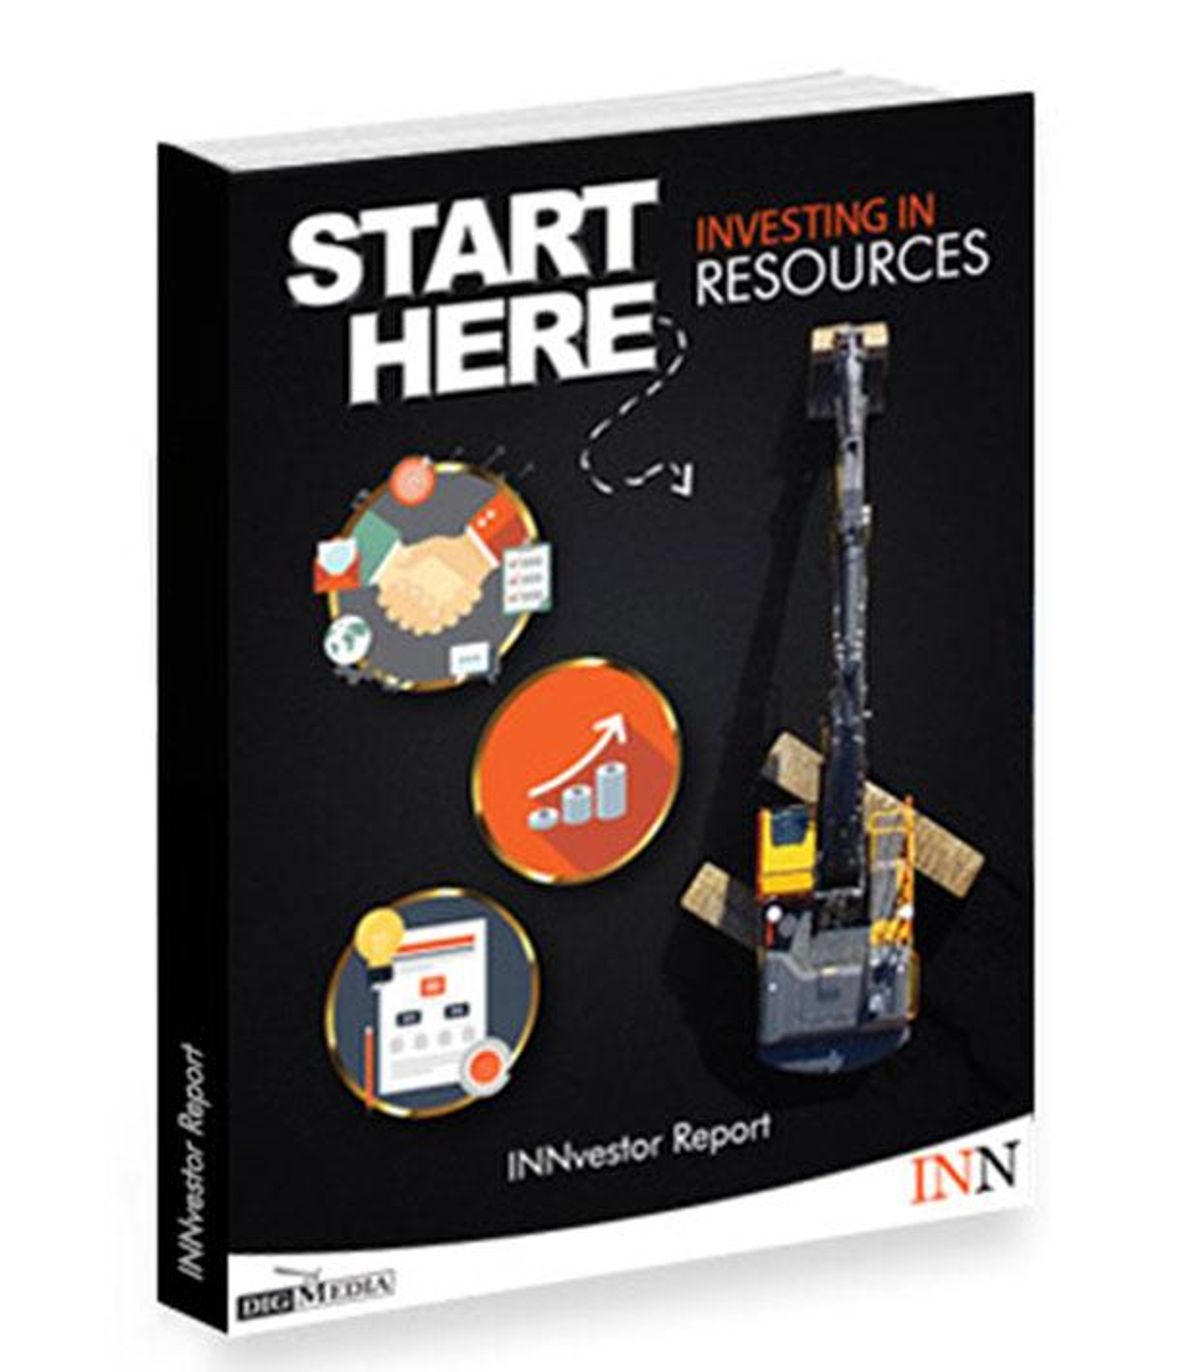 Start Here – Investing in Resources